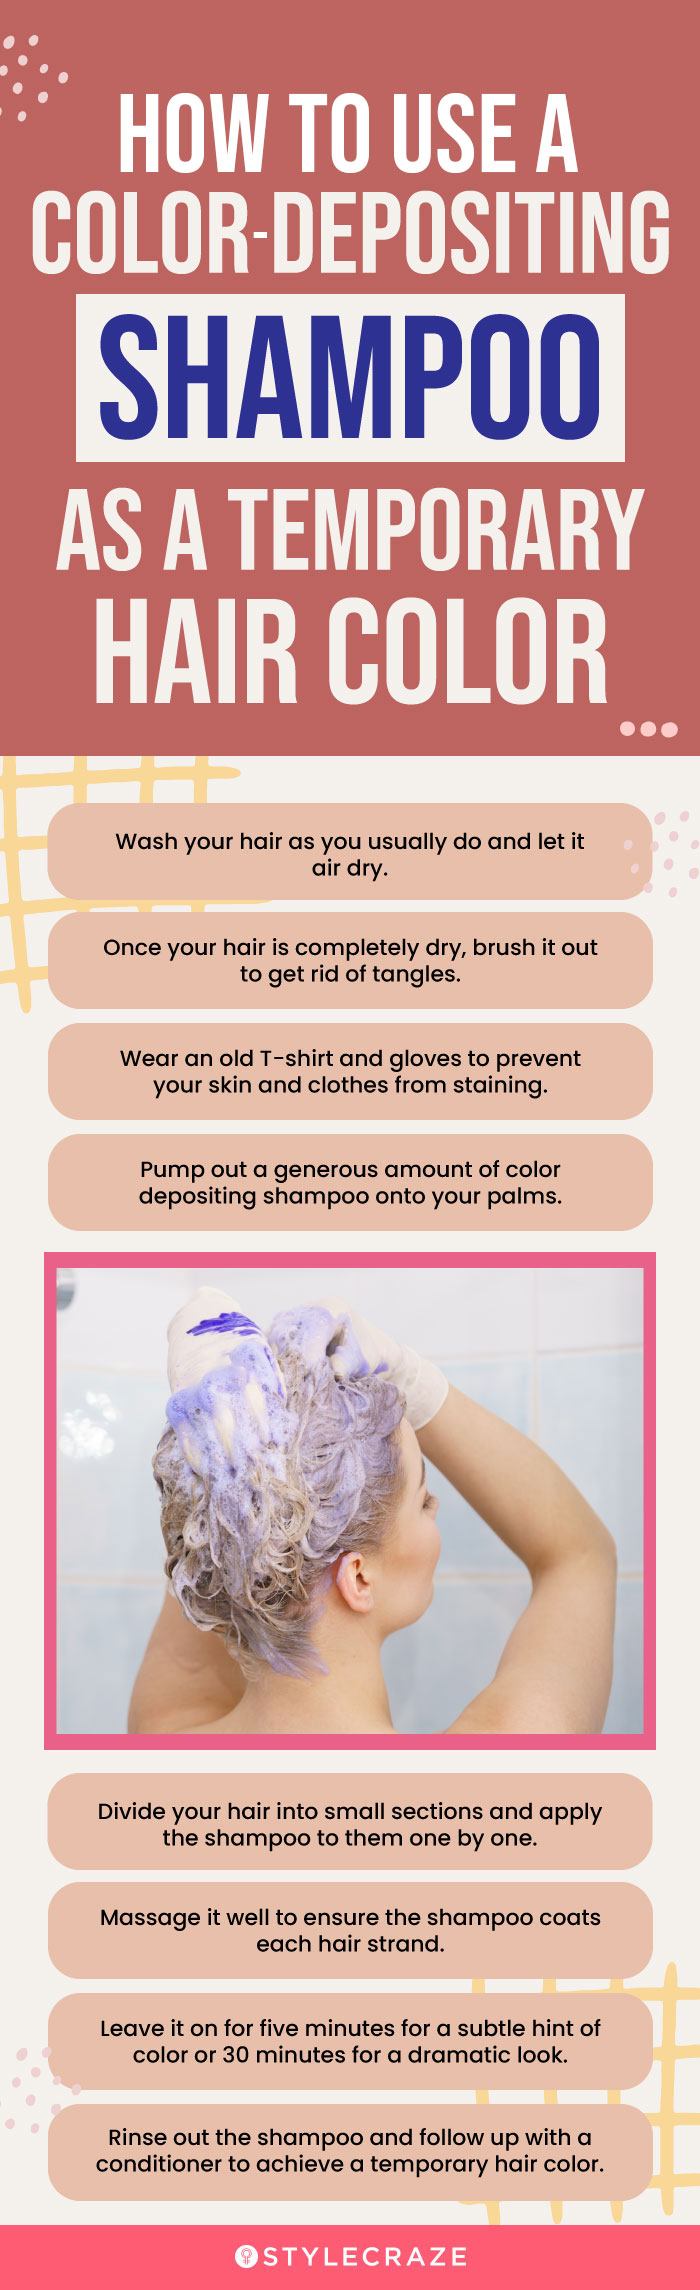 How To Use A Color-Depositing Shampoo As A Temporary Hair Color (infographic)